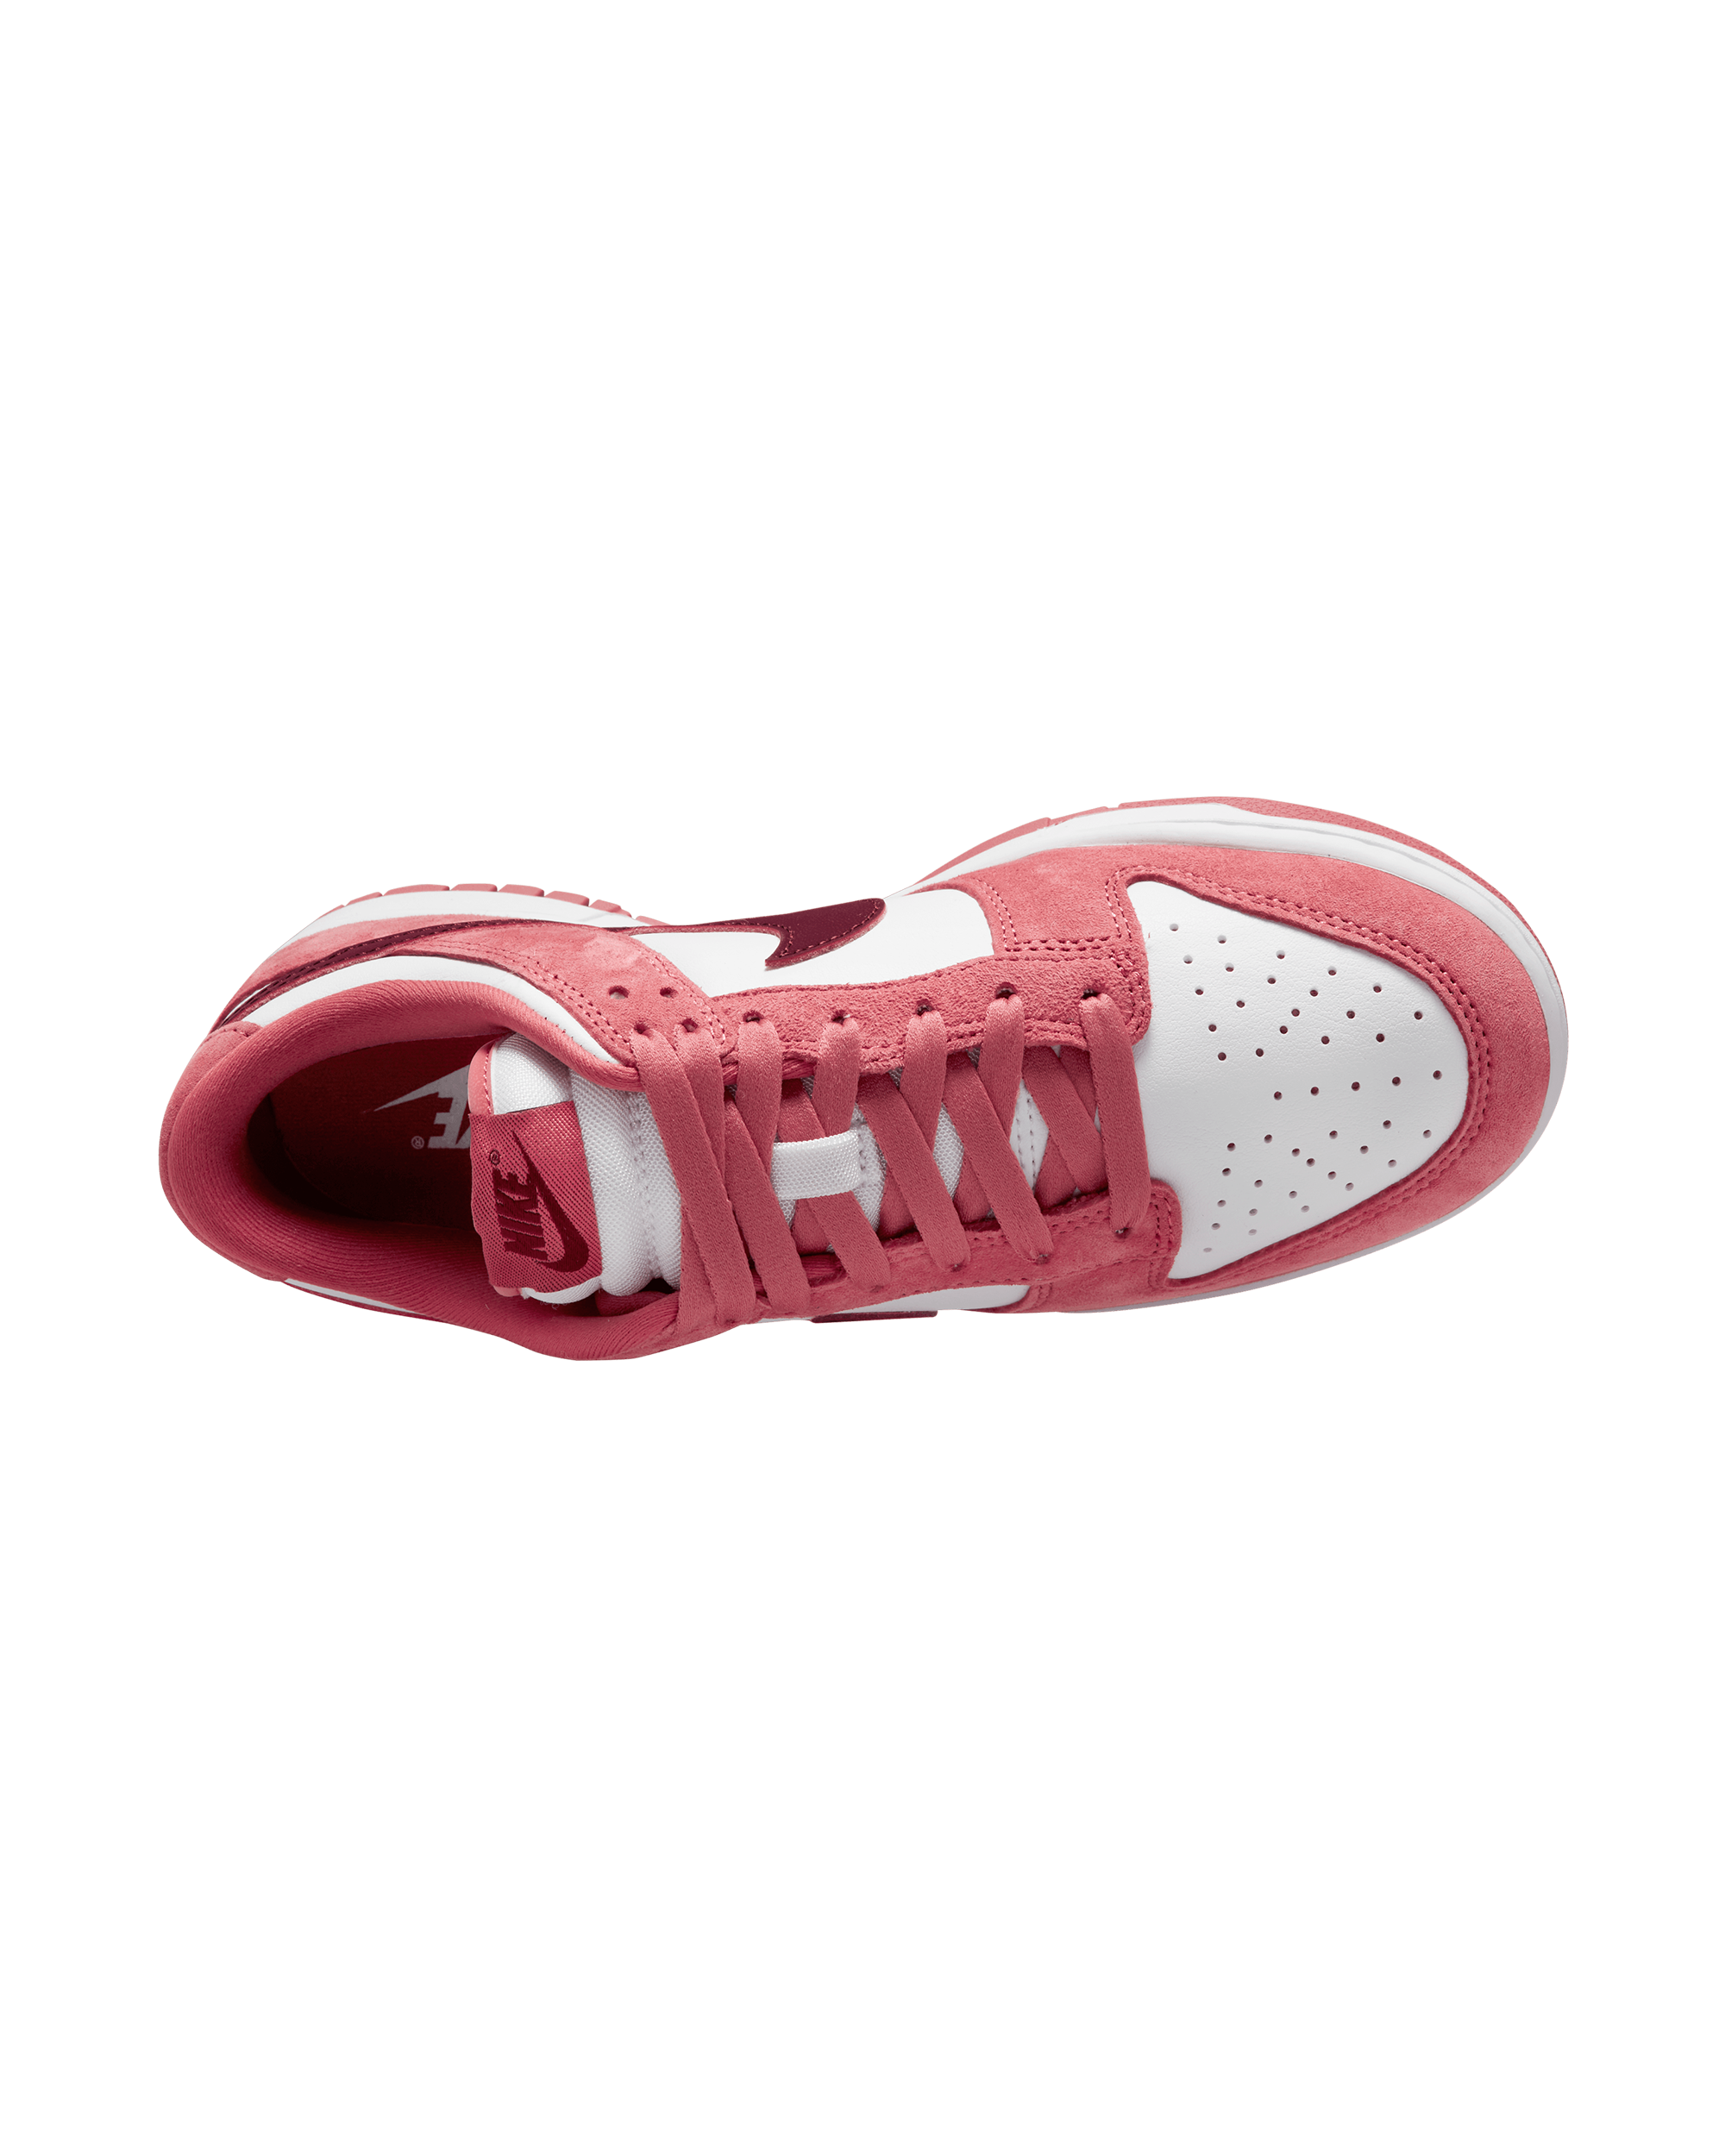 Womens Dunk Low Valentines day - White / Team Red / Dragon Red